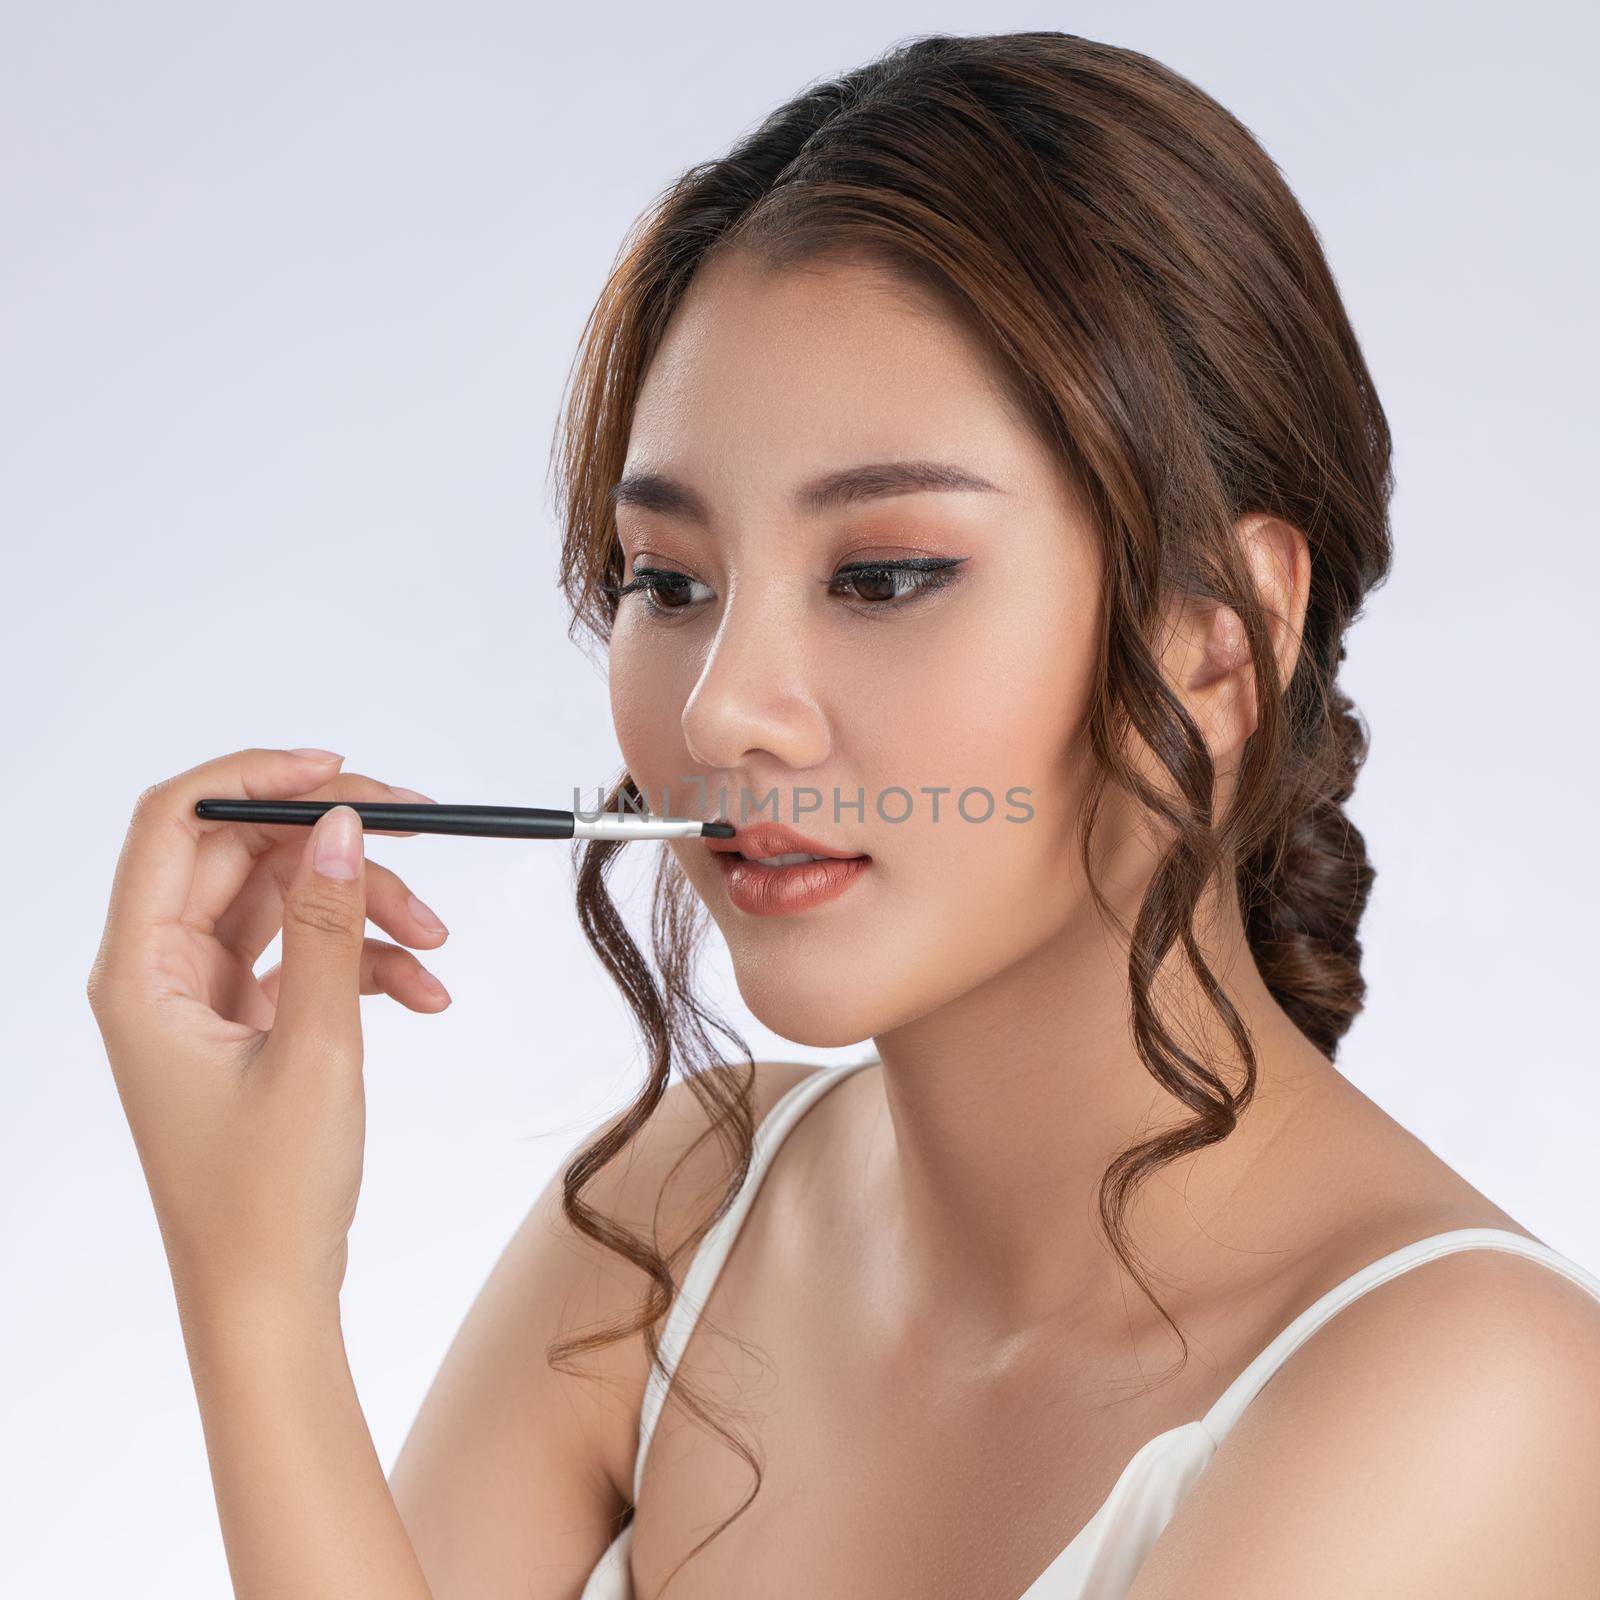 Closeup gorgeous woman with healthy skin apply lipstick while looking at camera by biancoblue